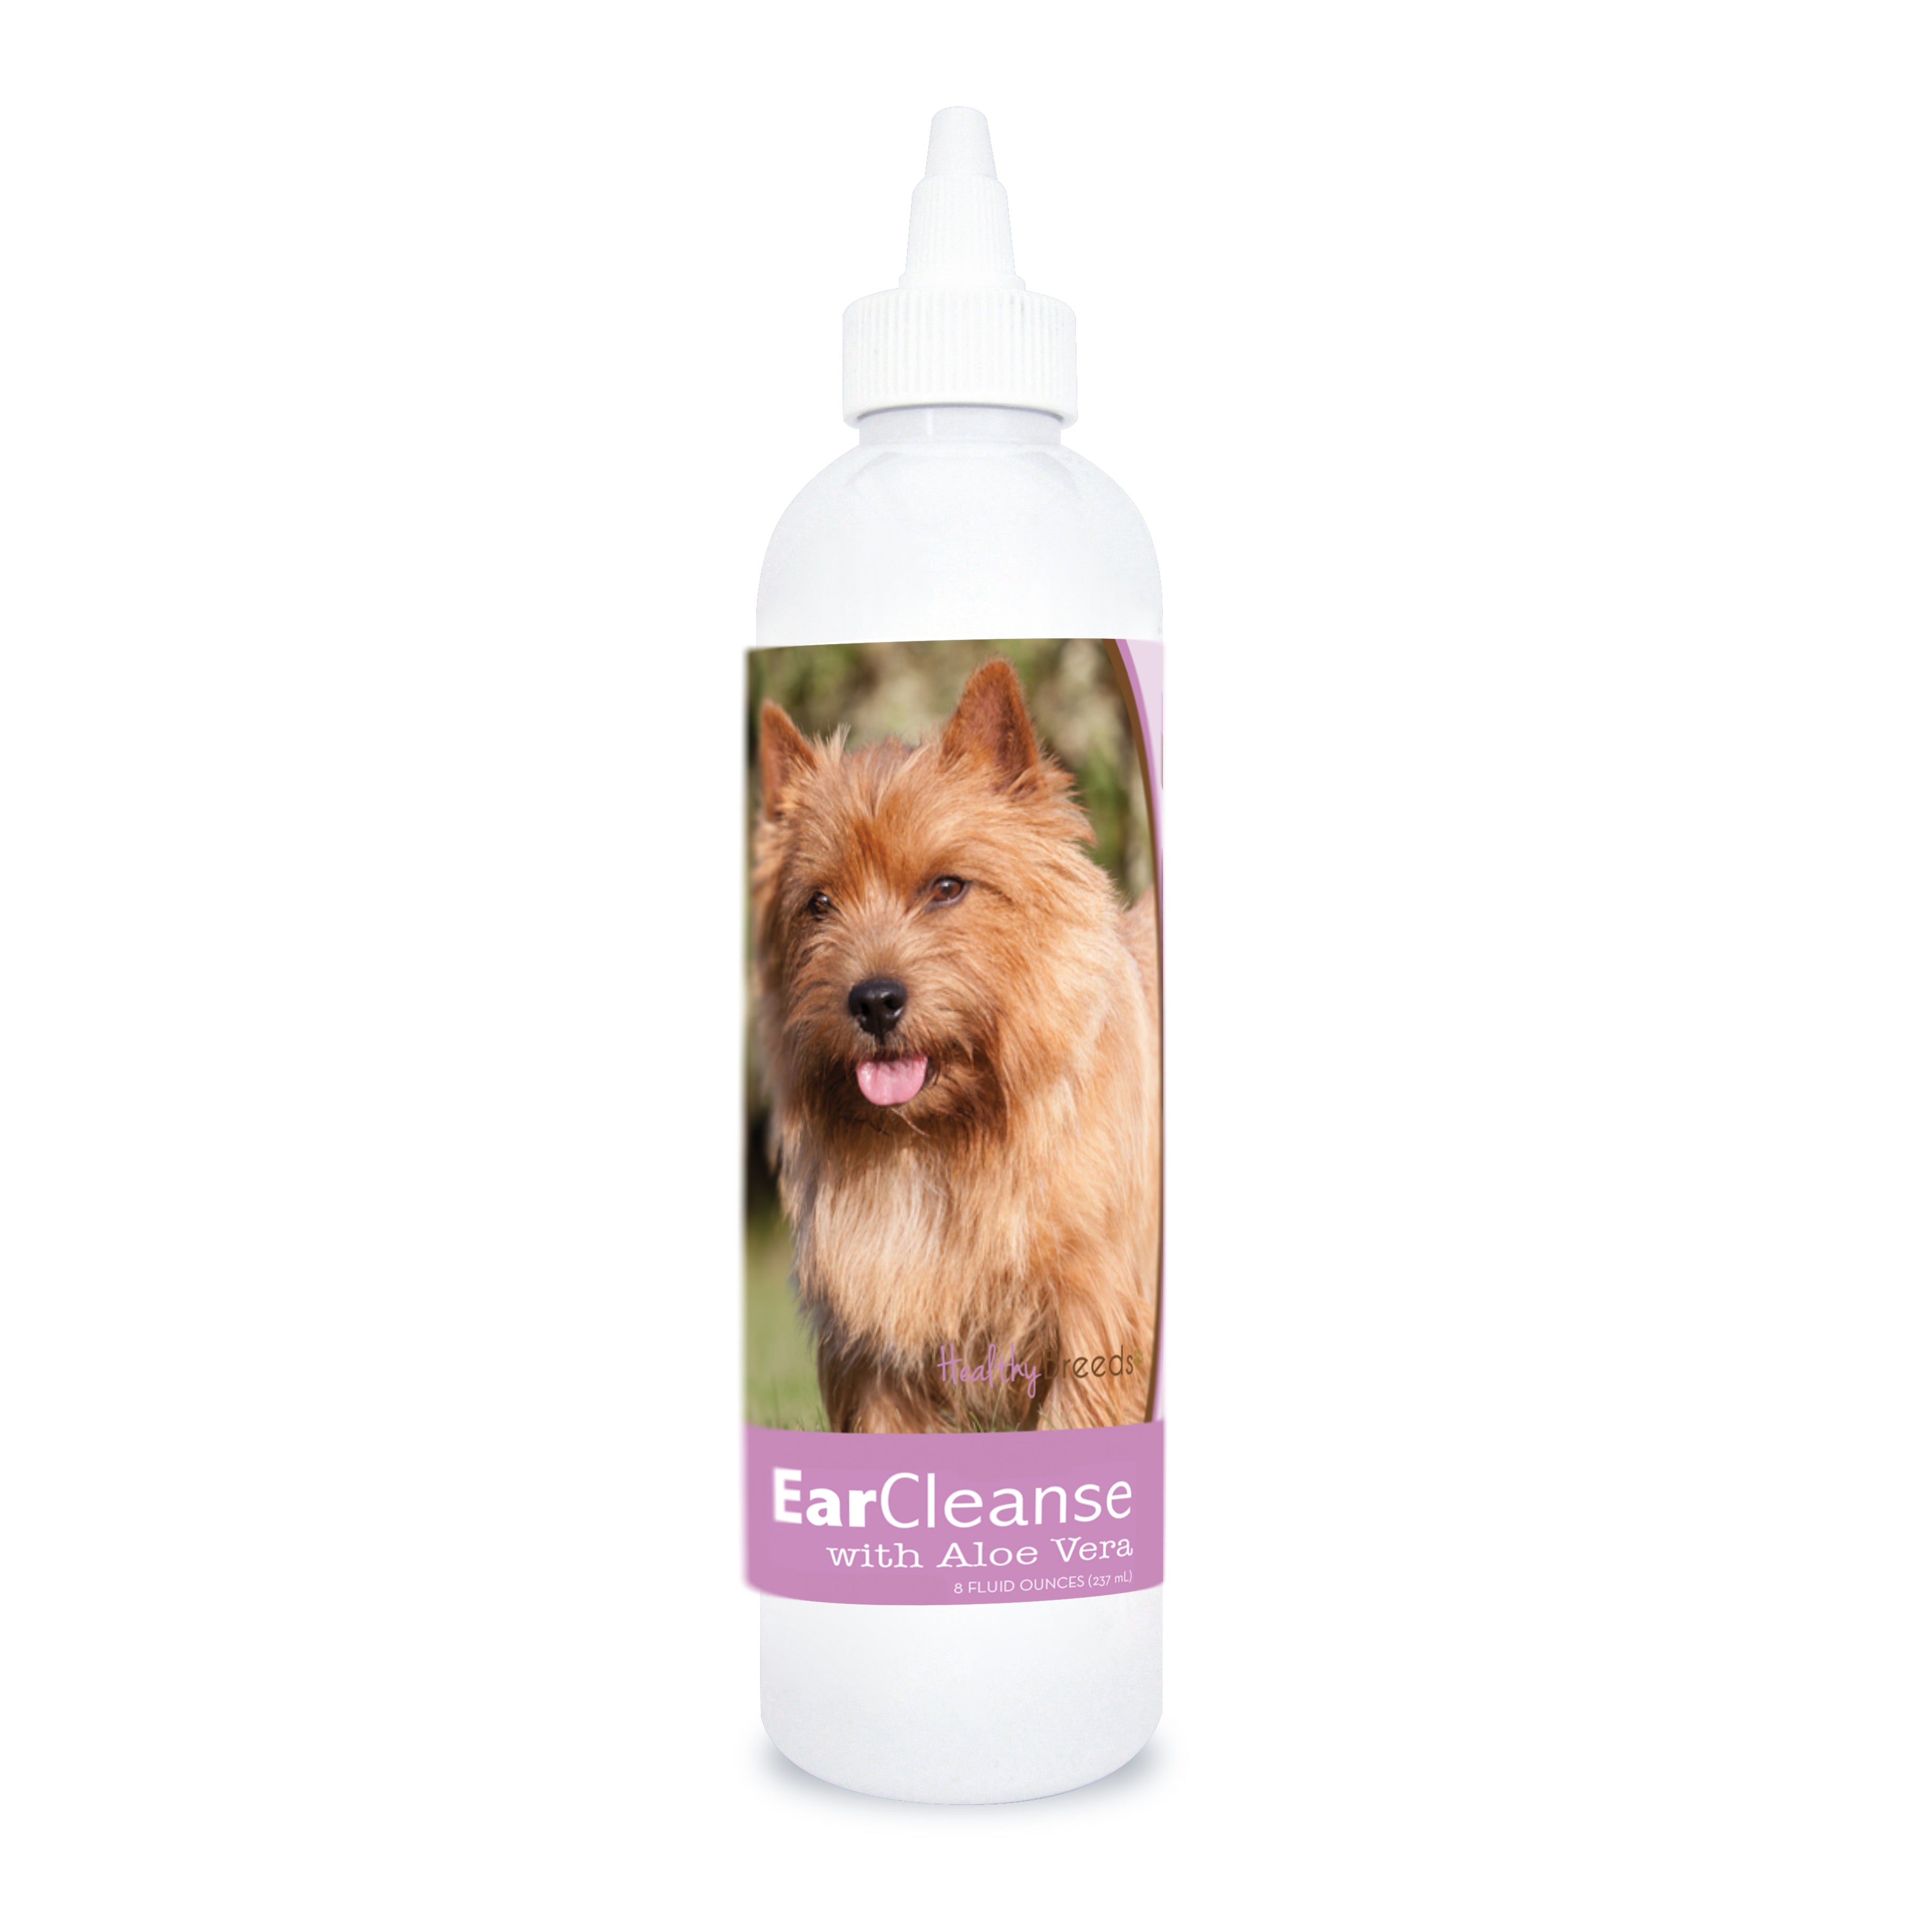 Norwich Terrier Ear Cleanse with Aloe Vera Sweet Pea and Vanilla 8 oz